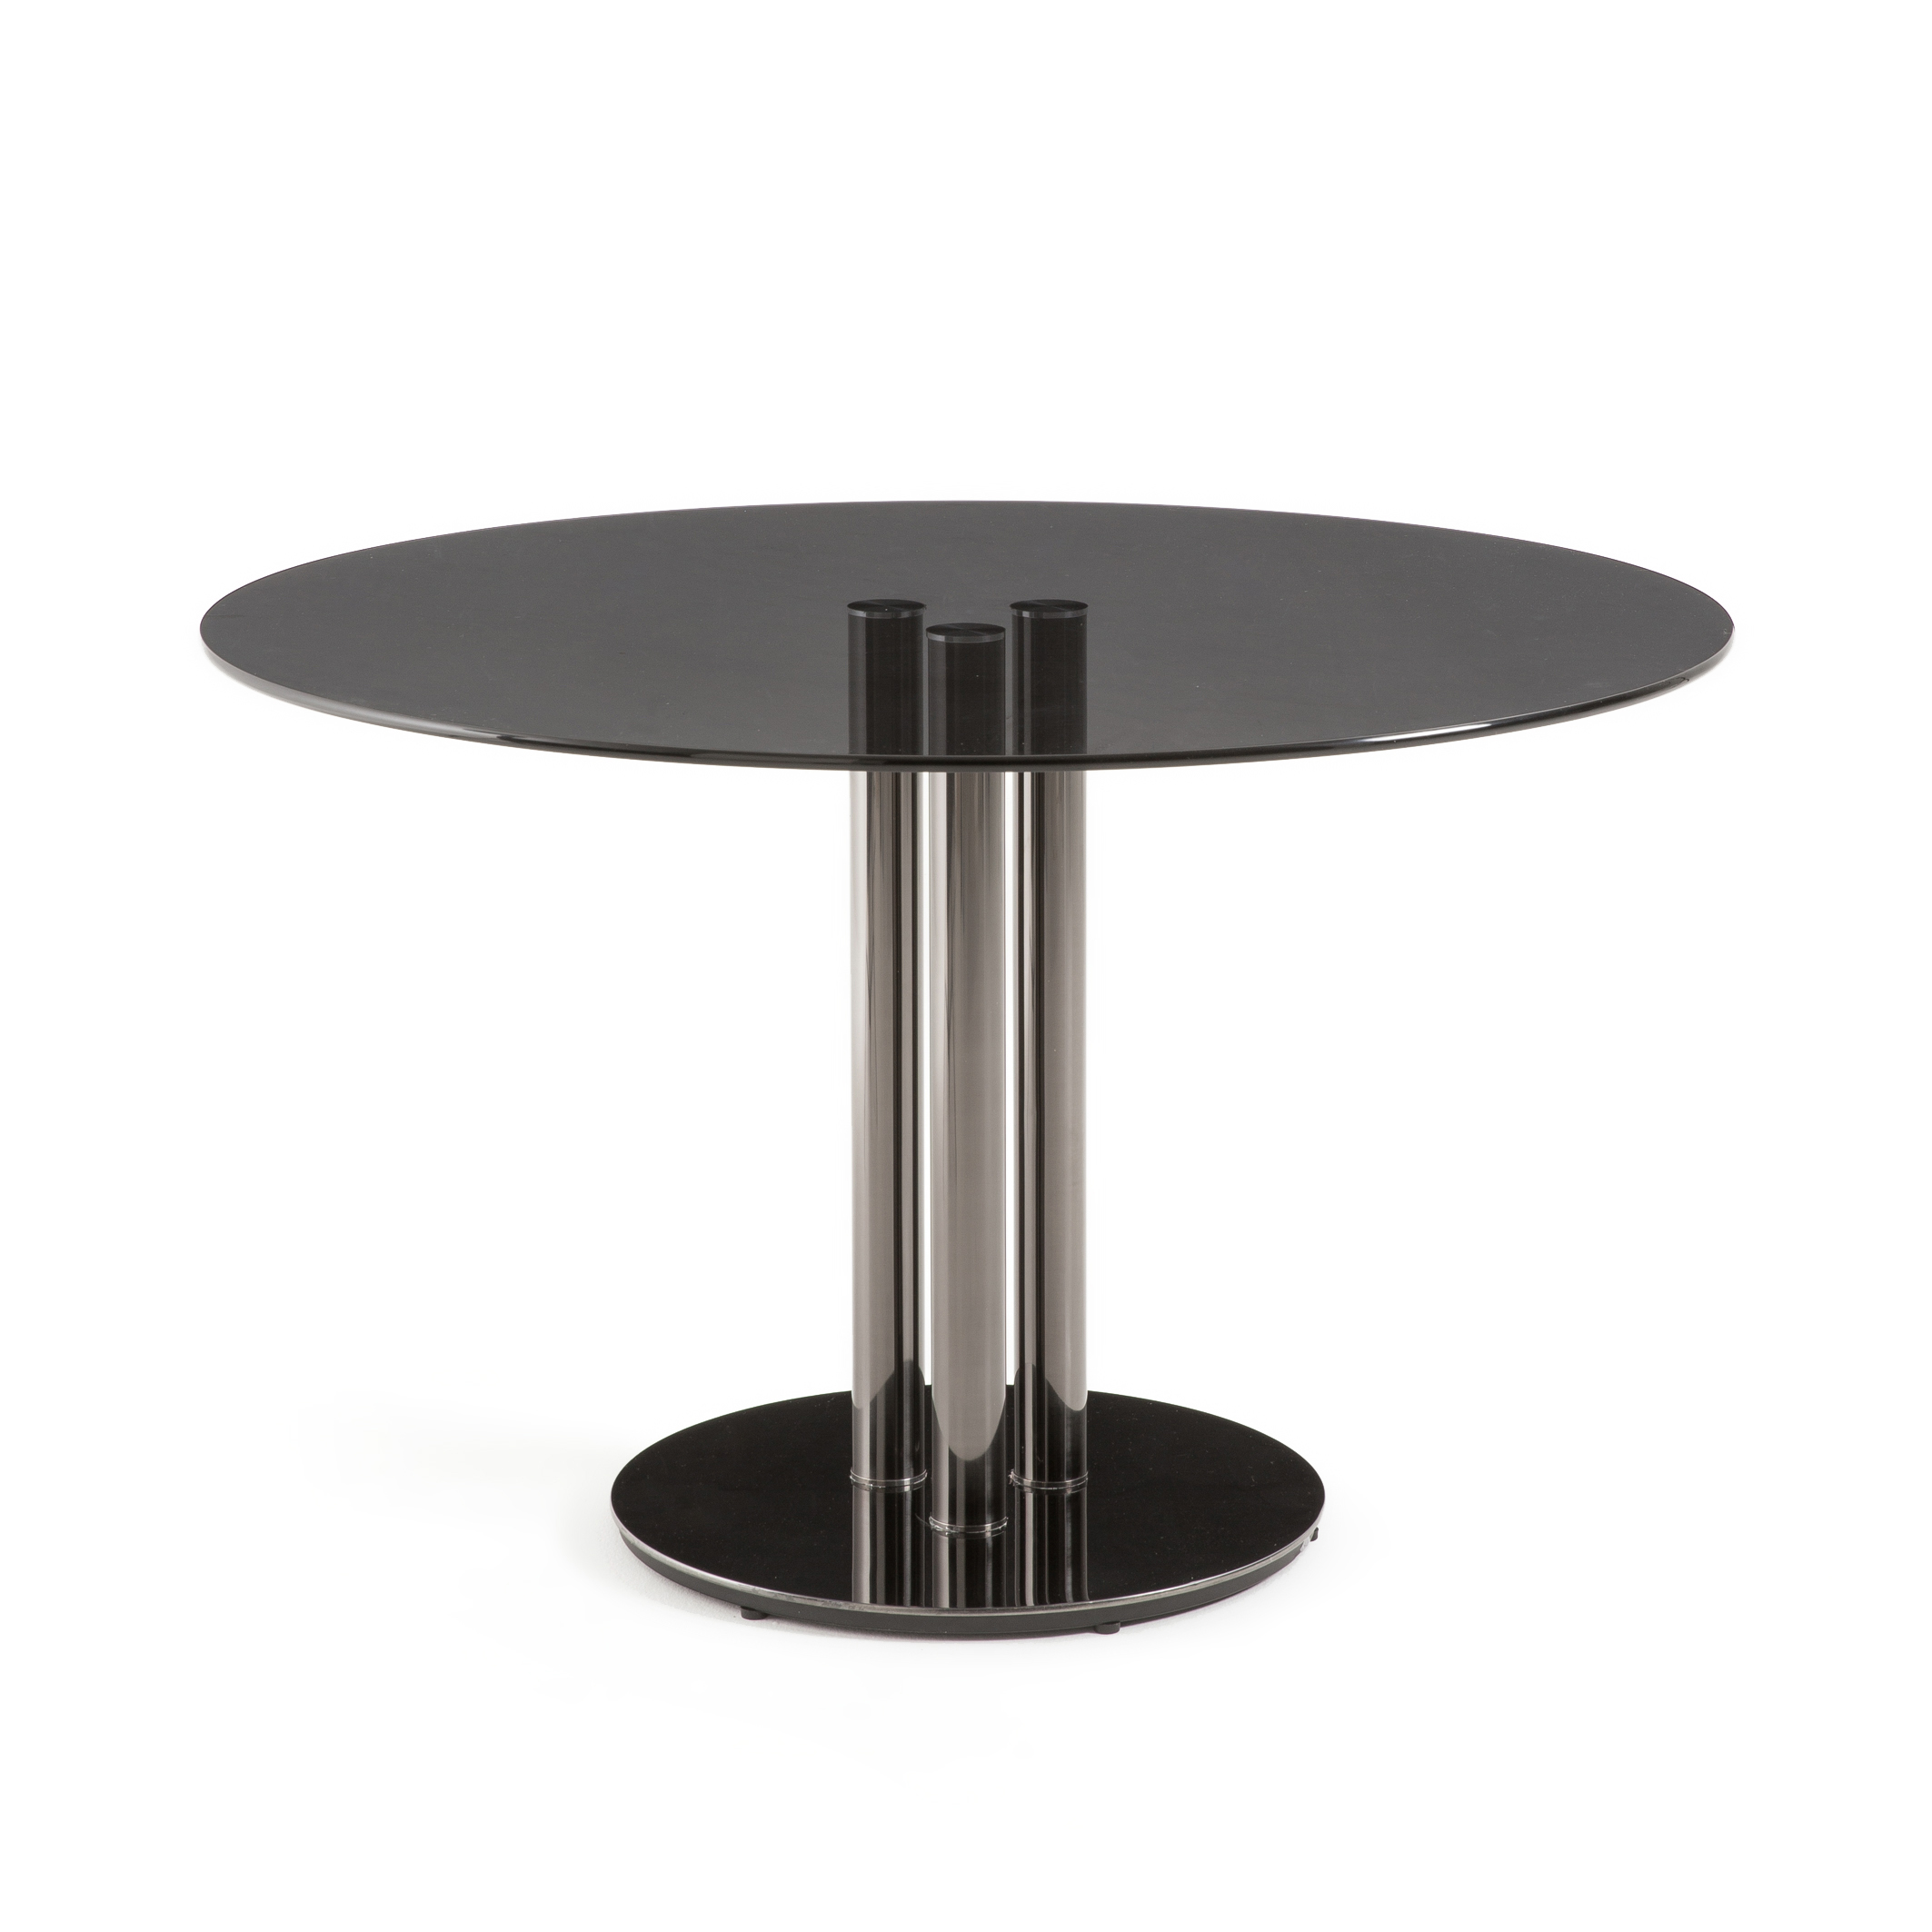 Neso Round Tempered Glass Dining Table, Black Round Pedestal Dining Table For 6